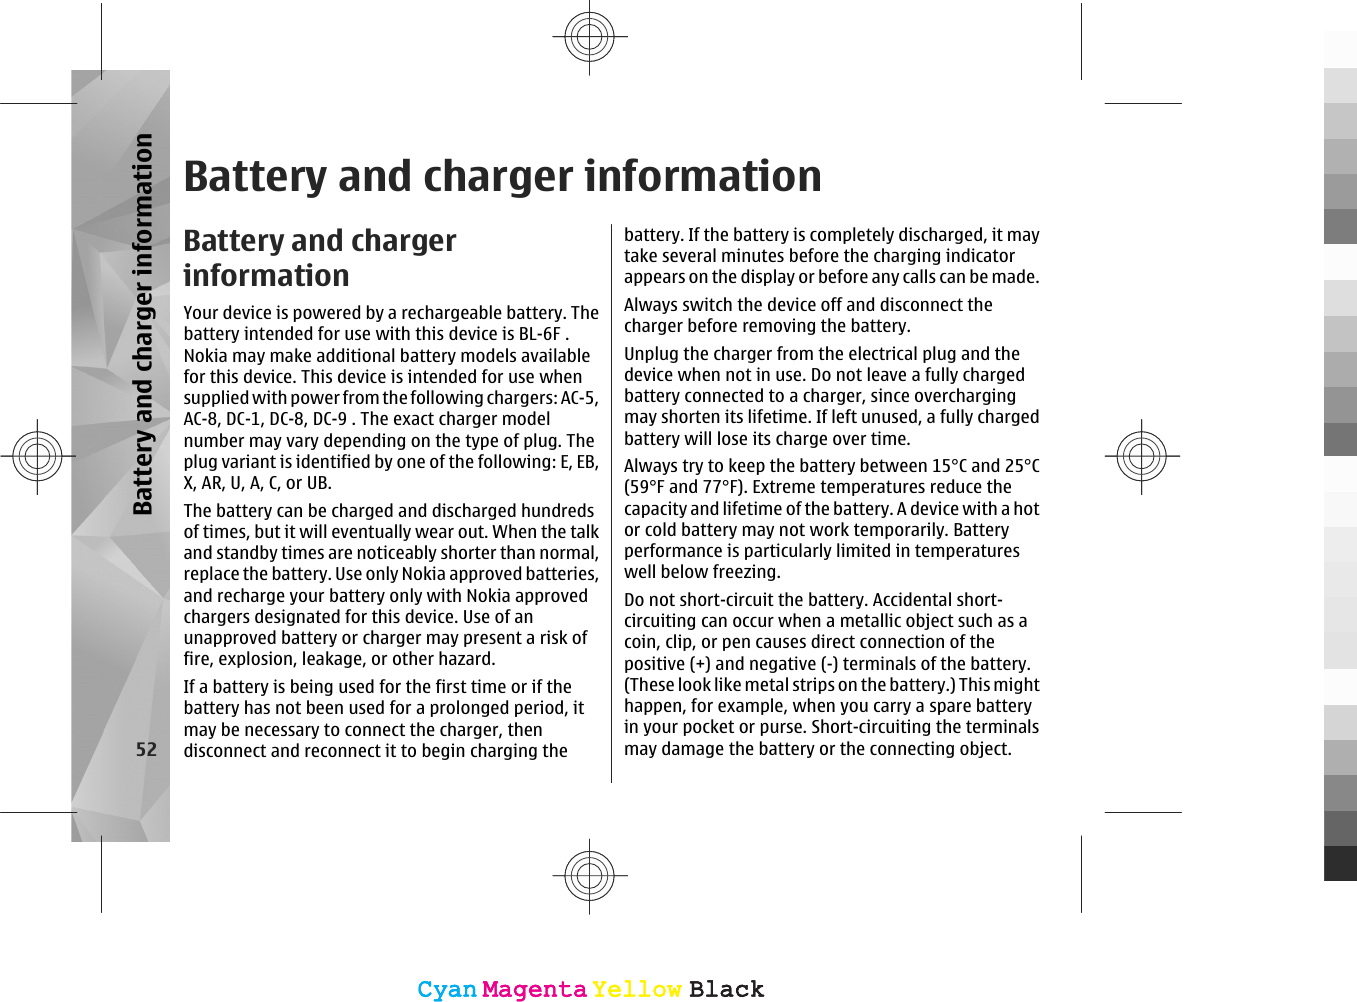 Battery and charger informationBattery and chargerinformationYour device is powered by a rechargeable battery. Thebattery intended for use with this device is BL-6F .Nokia may make additional battery models availablefor this device. This device is intended for use whensupplied with power from the following chargers: AC-5,AC-8, DC-1, DC-8, DC-9 . The exact charger modelnumber may vary depending on the type of plug. Theplug variant is identified by one of the following: E, EB,X, AR, U, A, C, or UB.The battery can be charged and discharged hundredsof times, but it will eventually wear out. When the talkand standby times are noticeably shorter than normal,replace the battery. Use only Nokia approved batteries,and recharge your battery only with Nokia approvedchargers designated for this device. Use of anunapproved battery or charger may present a risk offire, explosion, leakage, or other hazard.If a battery is being used for the first time or if thebattery has not been used for a prolonged period, itmay be necessary to connect the charger, thendisconnect and reconnect it to begin charging thebattery. If the battery is completely discharged, it maytake several minutes before the charging indicatorappears on the display or before any calls can be made.Always switch the device off and disconnect thecharger before removing the battery.Unplug the charger from the electrical plug and thedevice when not in use. Do not leave a fully chargedbattery connected to a charger, since overchargingmay shorten its lifetime. If left unused, a fully chargedbattery will lose its charge over time.Always try to keep the battery between 15°C and 25°C(59°F and 77°F). Extreme temperatures reduce thecapacity and lifetime of the battery. A device with a hotor cold battery may not work temporarily. Batteryperformance is particularly limited in temperatureswell below freezing.Do not short-circuit the battery. Accidental short-circuiting can occur when a metallic object such as acoin, clip, or pen causes direct connection of thepositive (+) and negative (-) terminals of the battery.(These look like metal strips on the battery.) This mighthappen, for example, when you carry a spare batteryin your pocket or purse. Short-circuiting the terminalsmay damage the battery or the connecting object.52Battery and charger informationCyanCyanMagentaMagentaYellowYellowBlackBlackCyanCyanMagentaMagentaYellowYellowBlackBlack